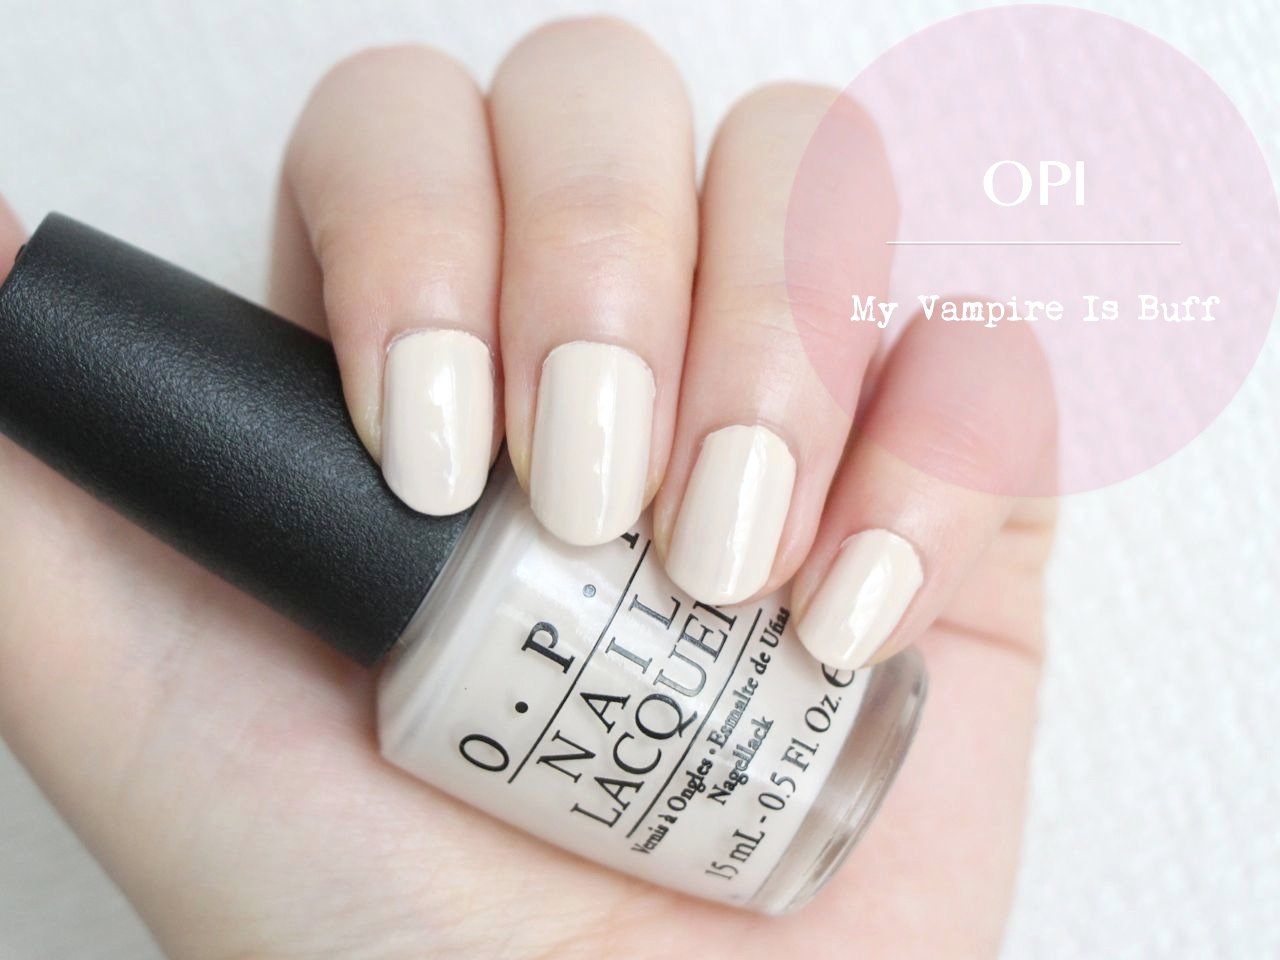 OPI Nail Lacquer, My Vampire is Buff - wide 3